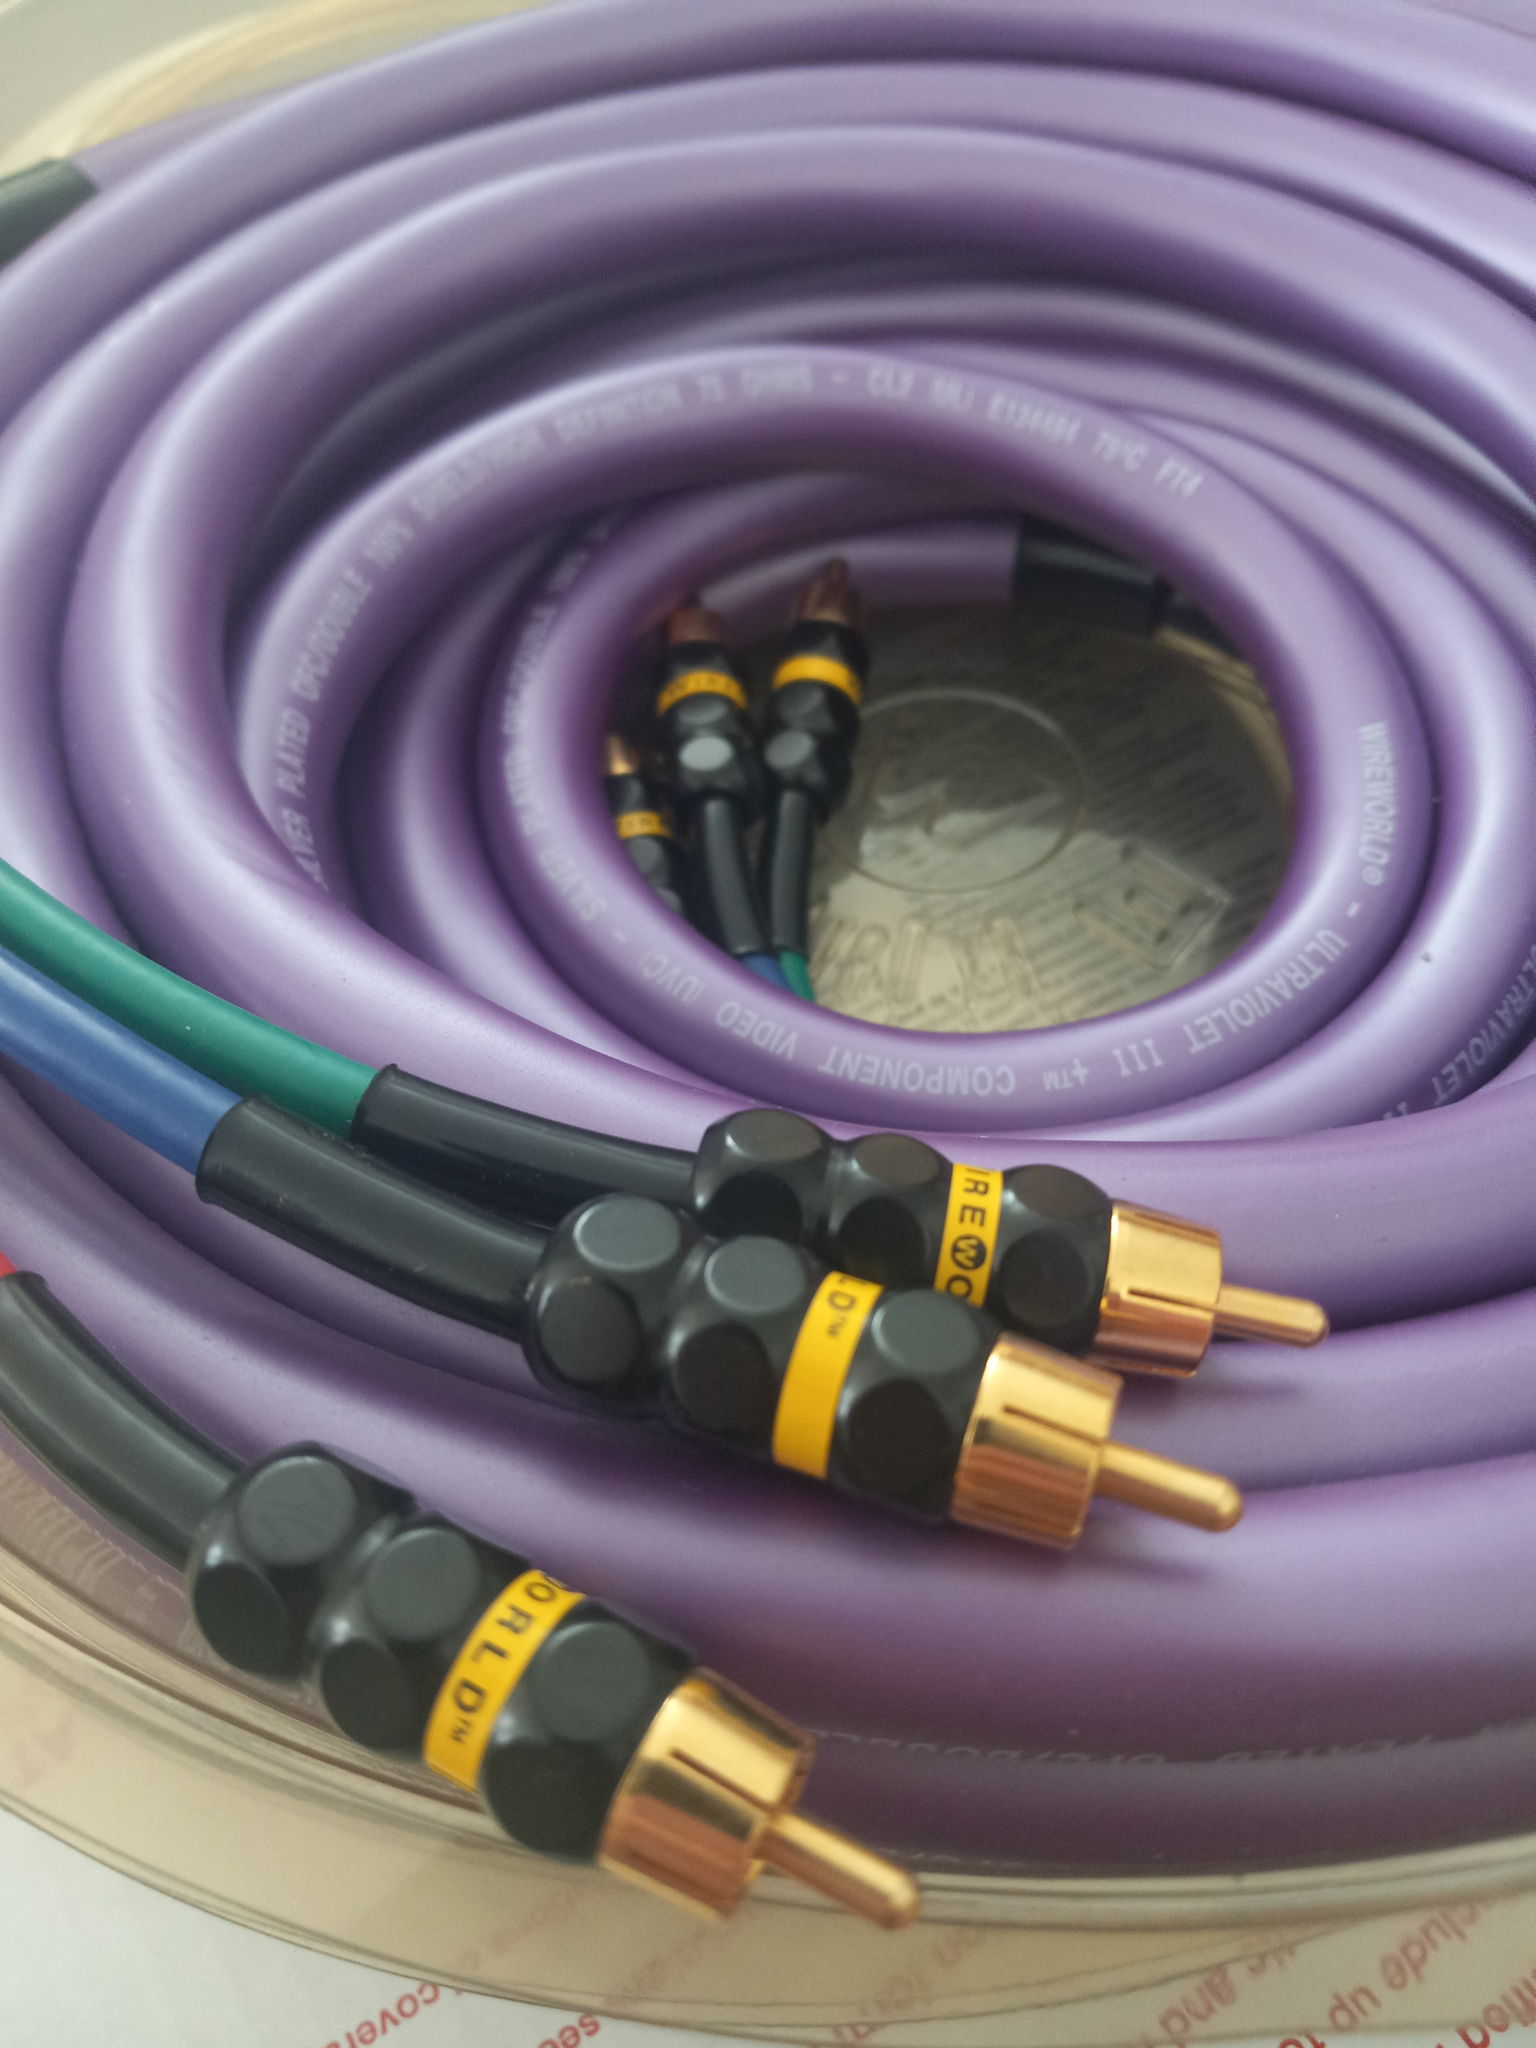 Wireworld ULTRAVIOLET III ultra component video cable, ... 3